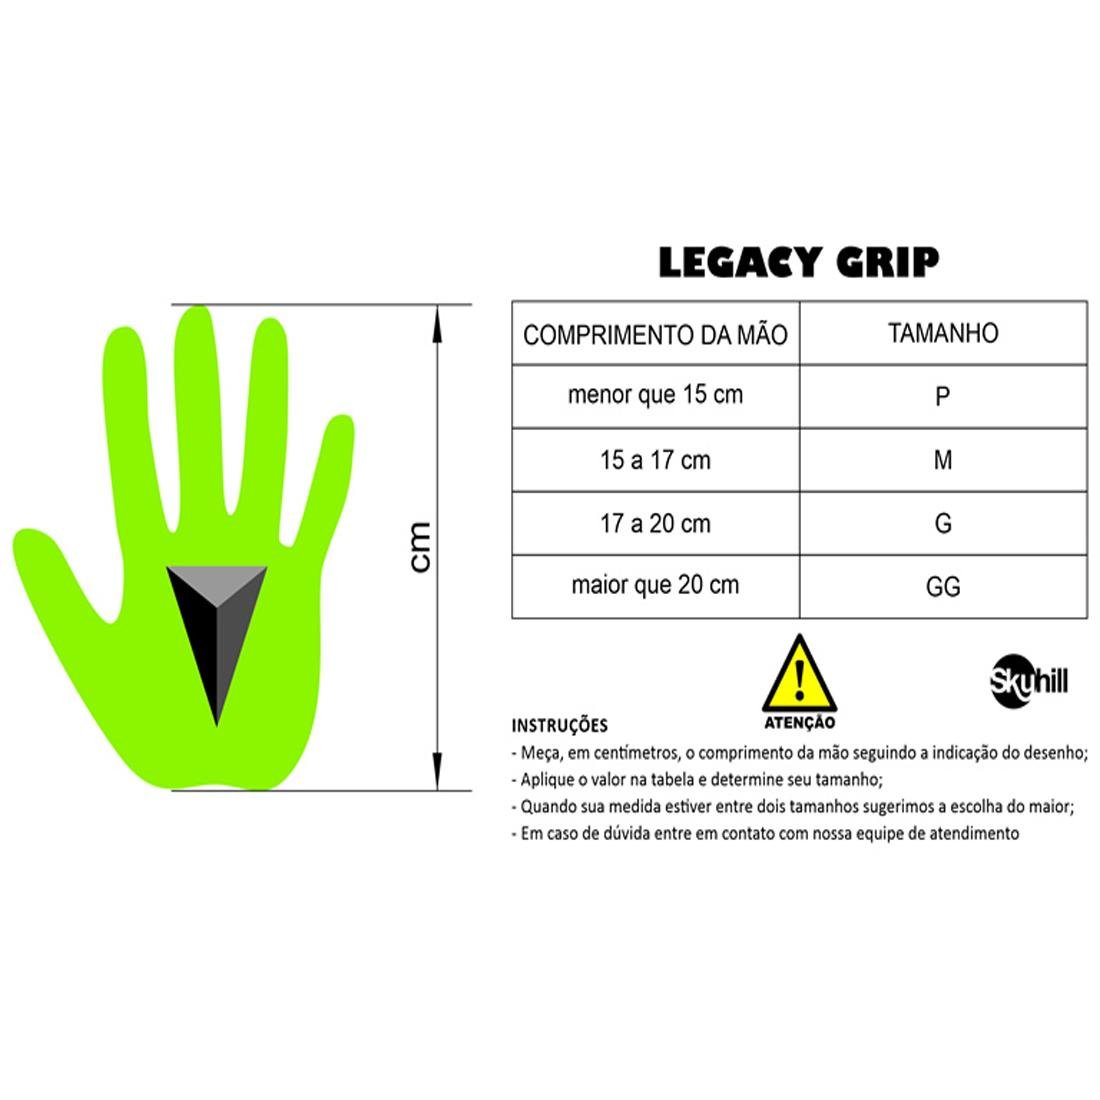 Hand Grip Legacy Power Colors Neopreme Skyhill - Pink - G - 3